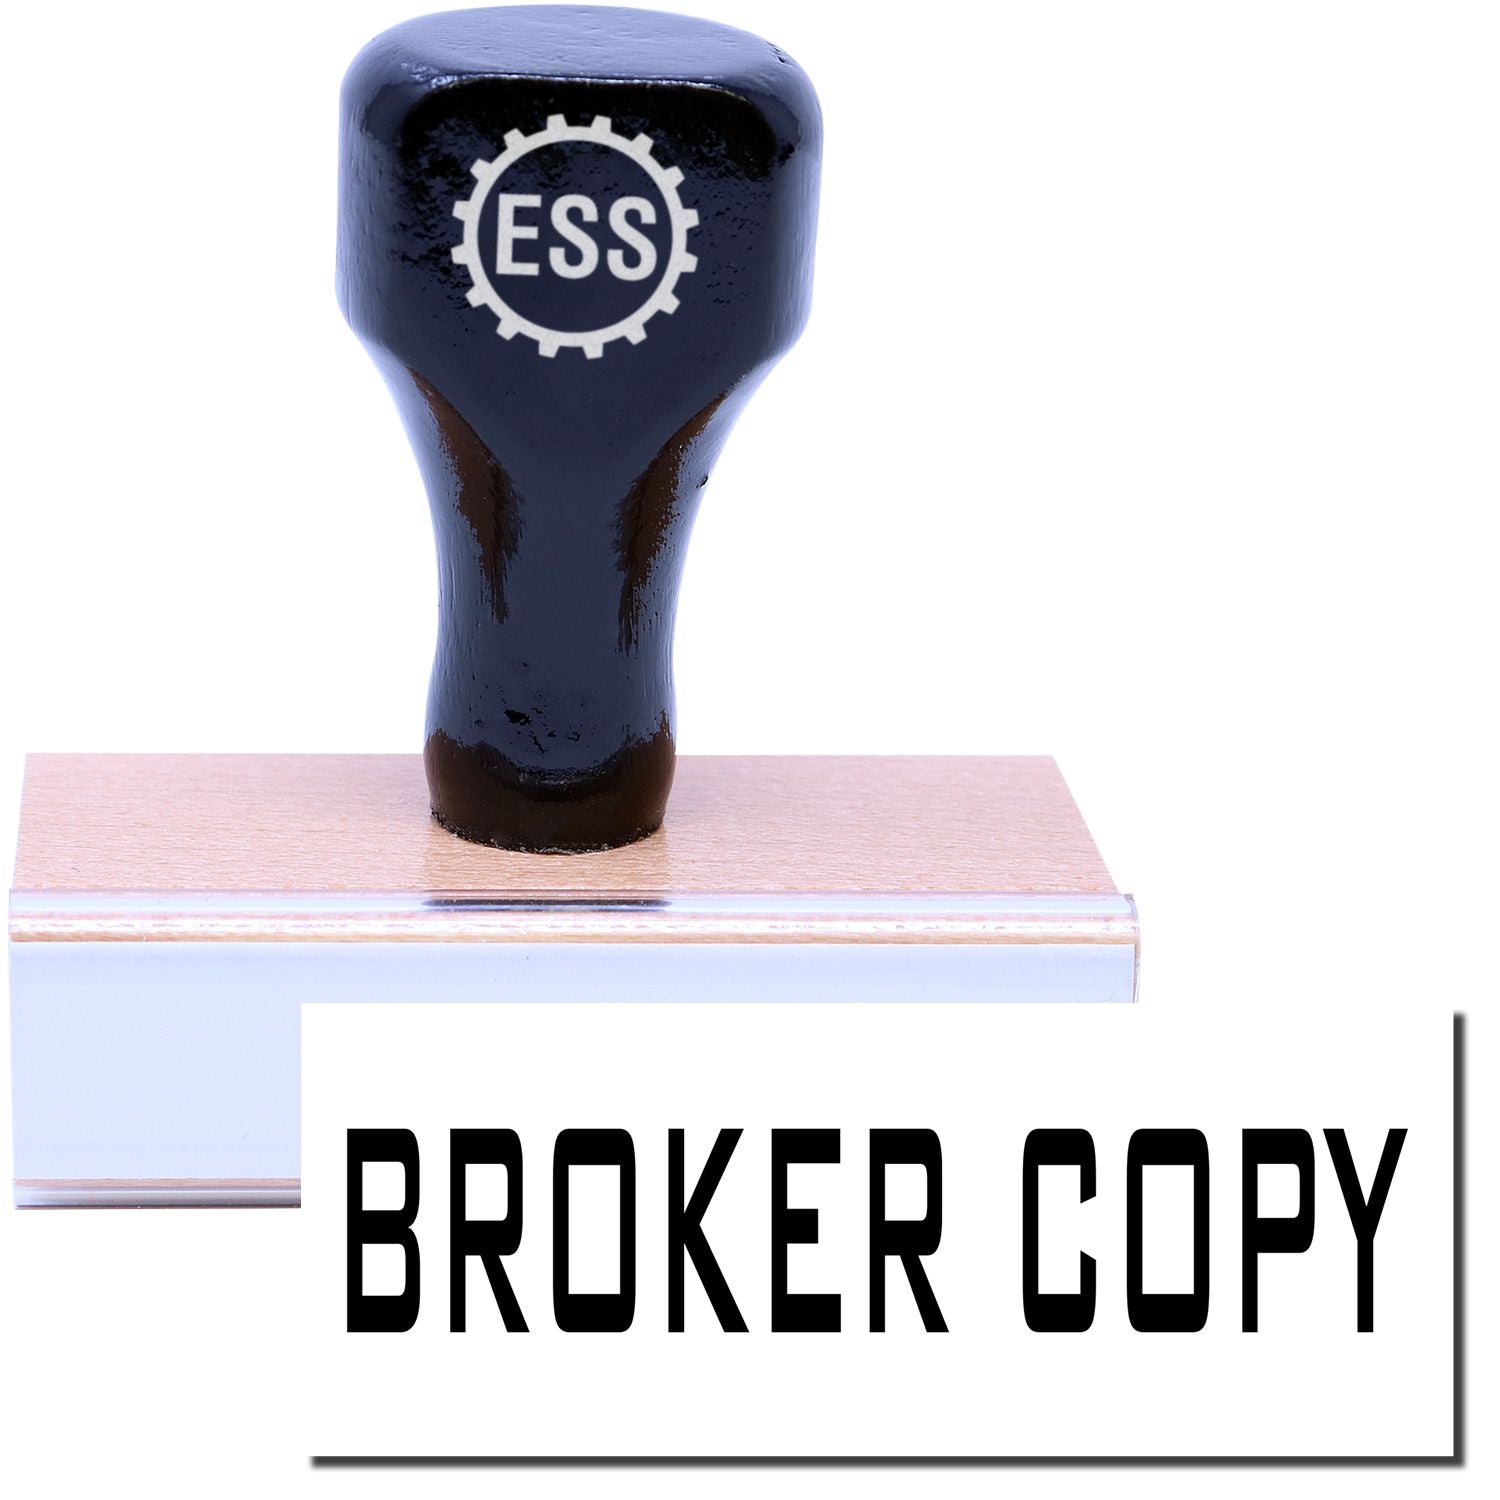 A stock office rubber stamp with a stamped image showing how the text "BROKER COPY" is displayed after stamping.